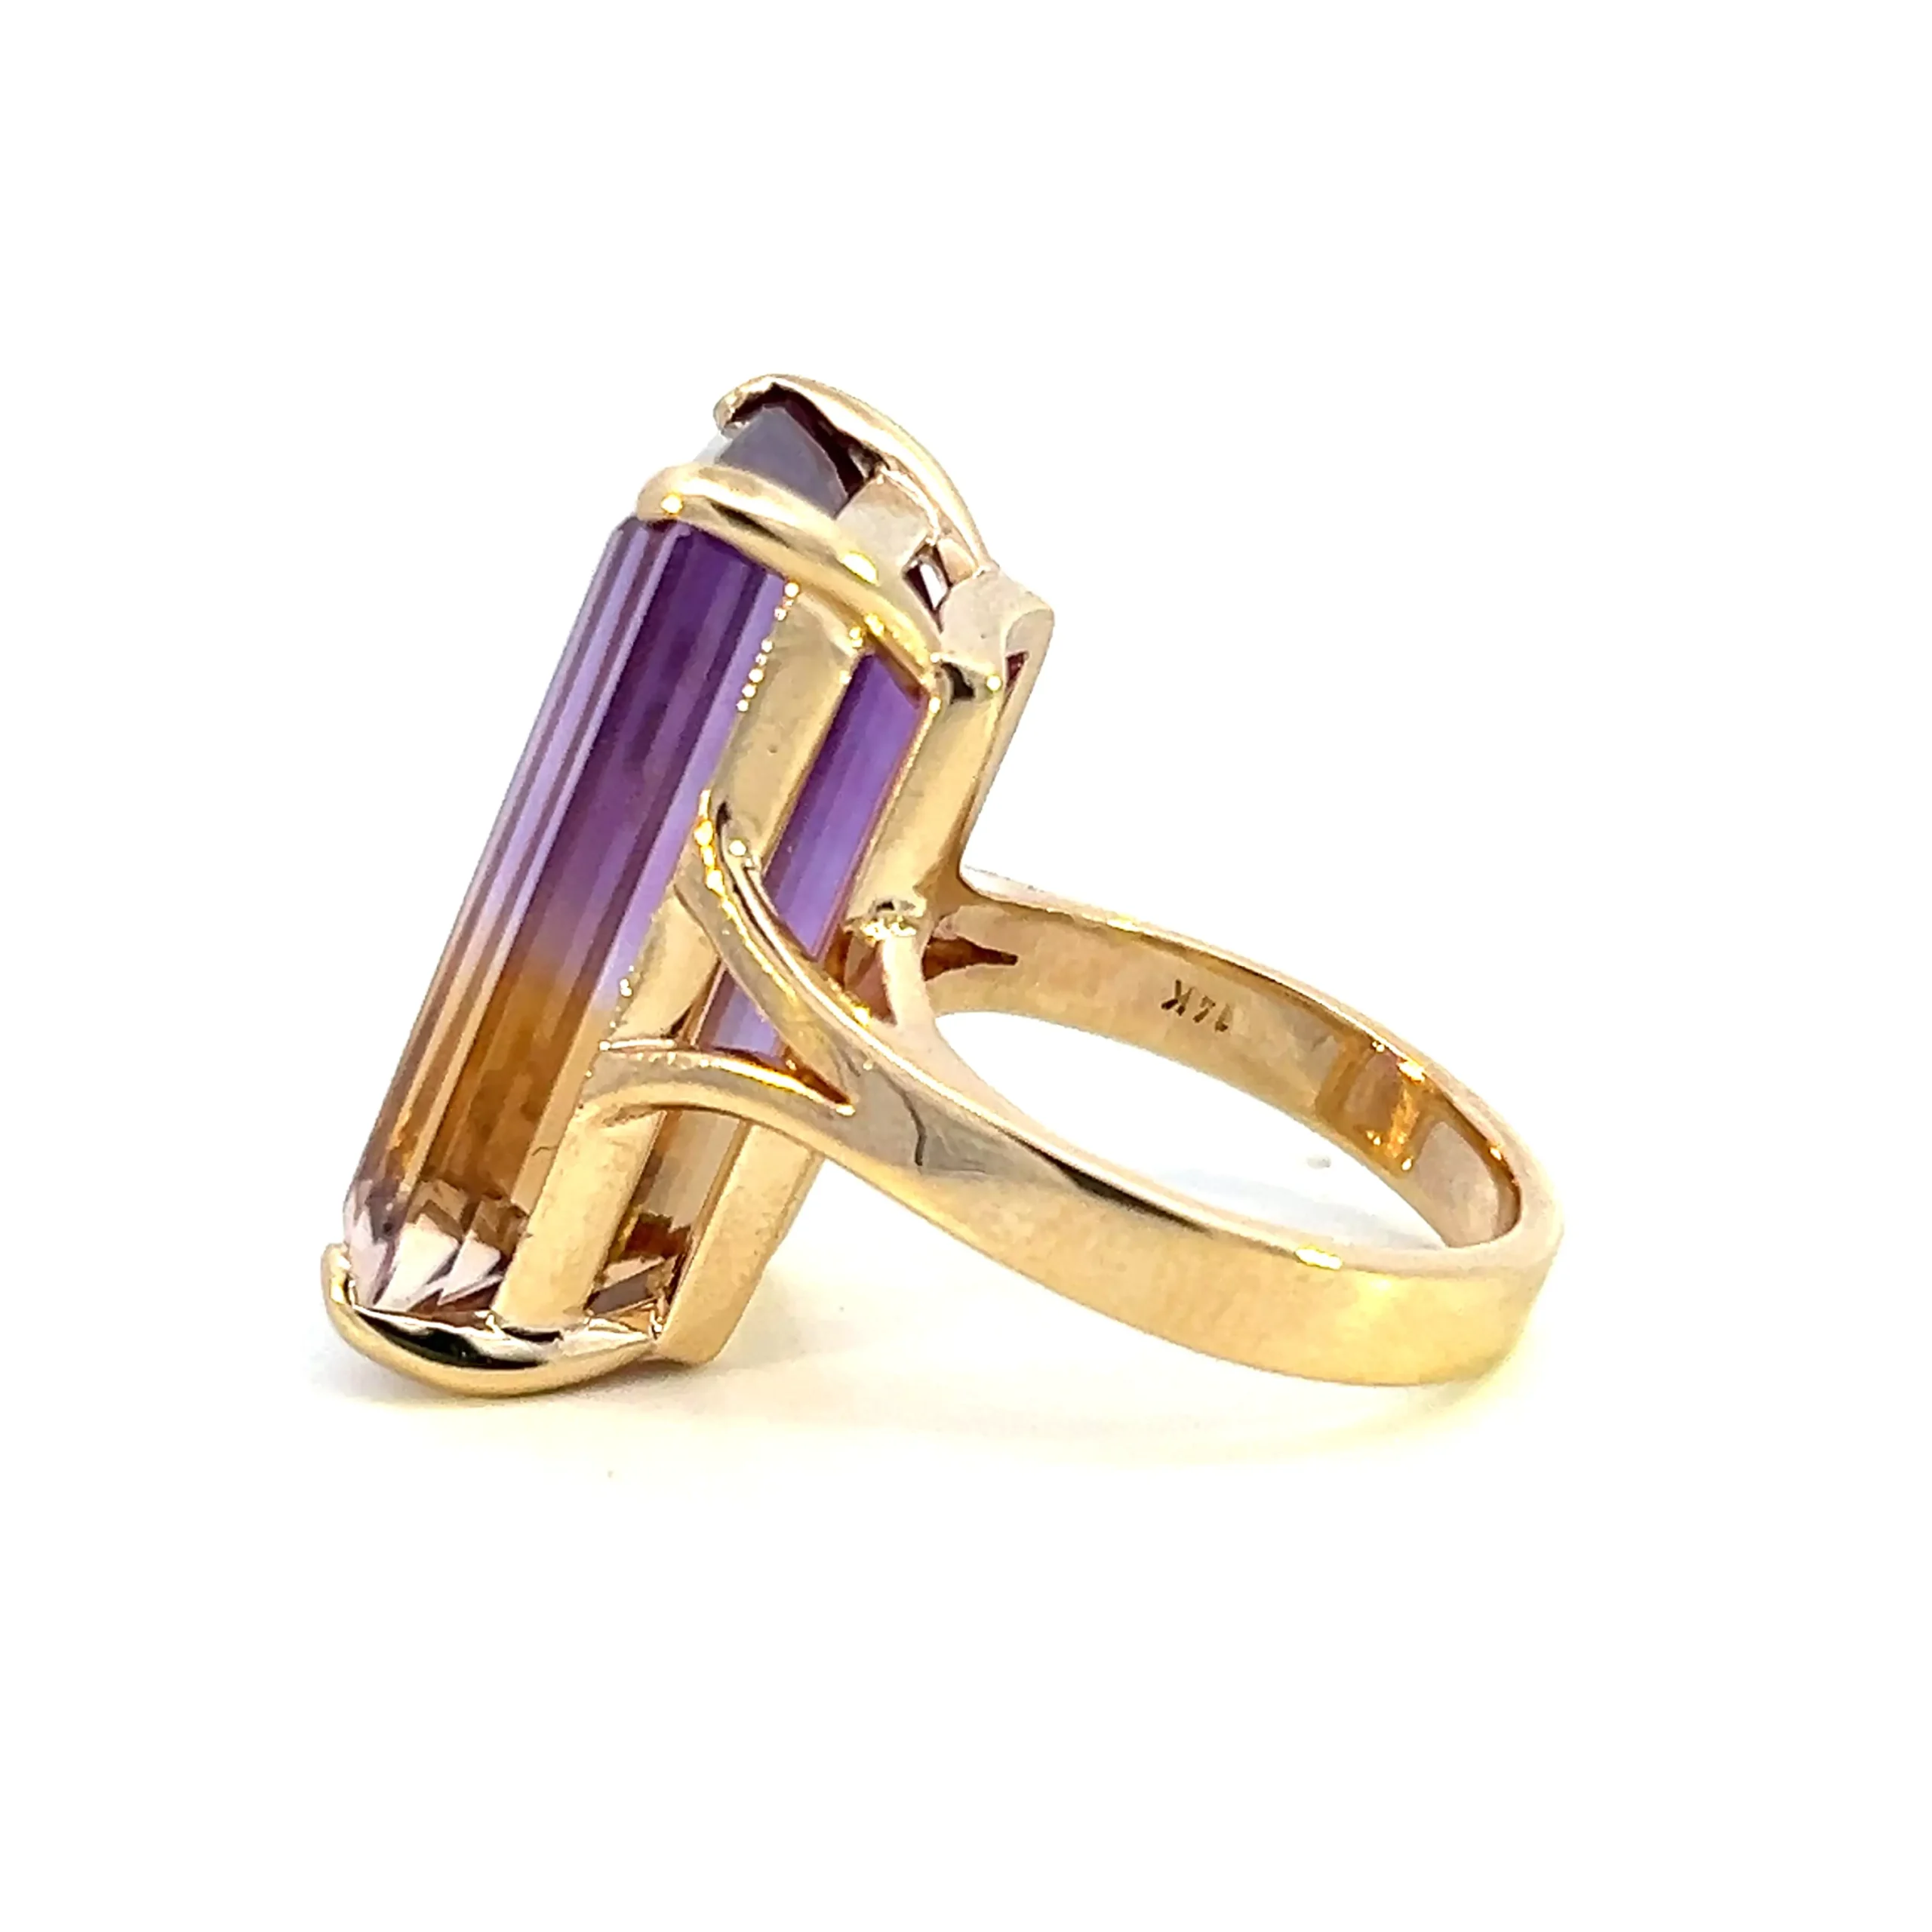 One estate 14 karat yellow gold solitaire gemstone ring with an emerald-cut ametrine weighing 18.93 carats in a four-prong setting